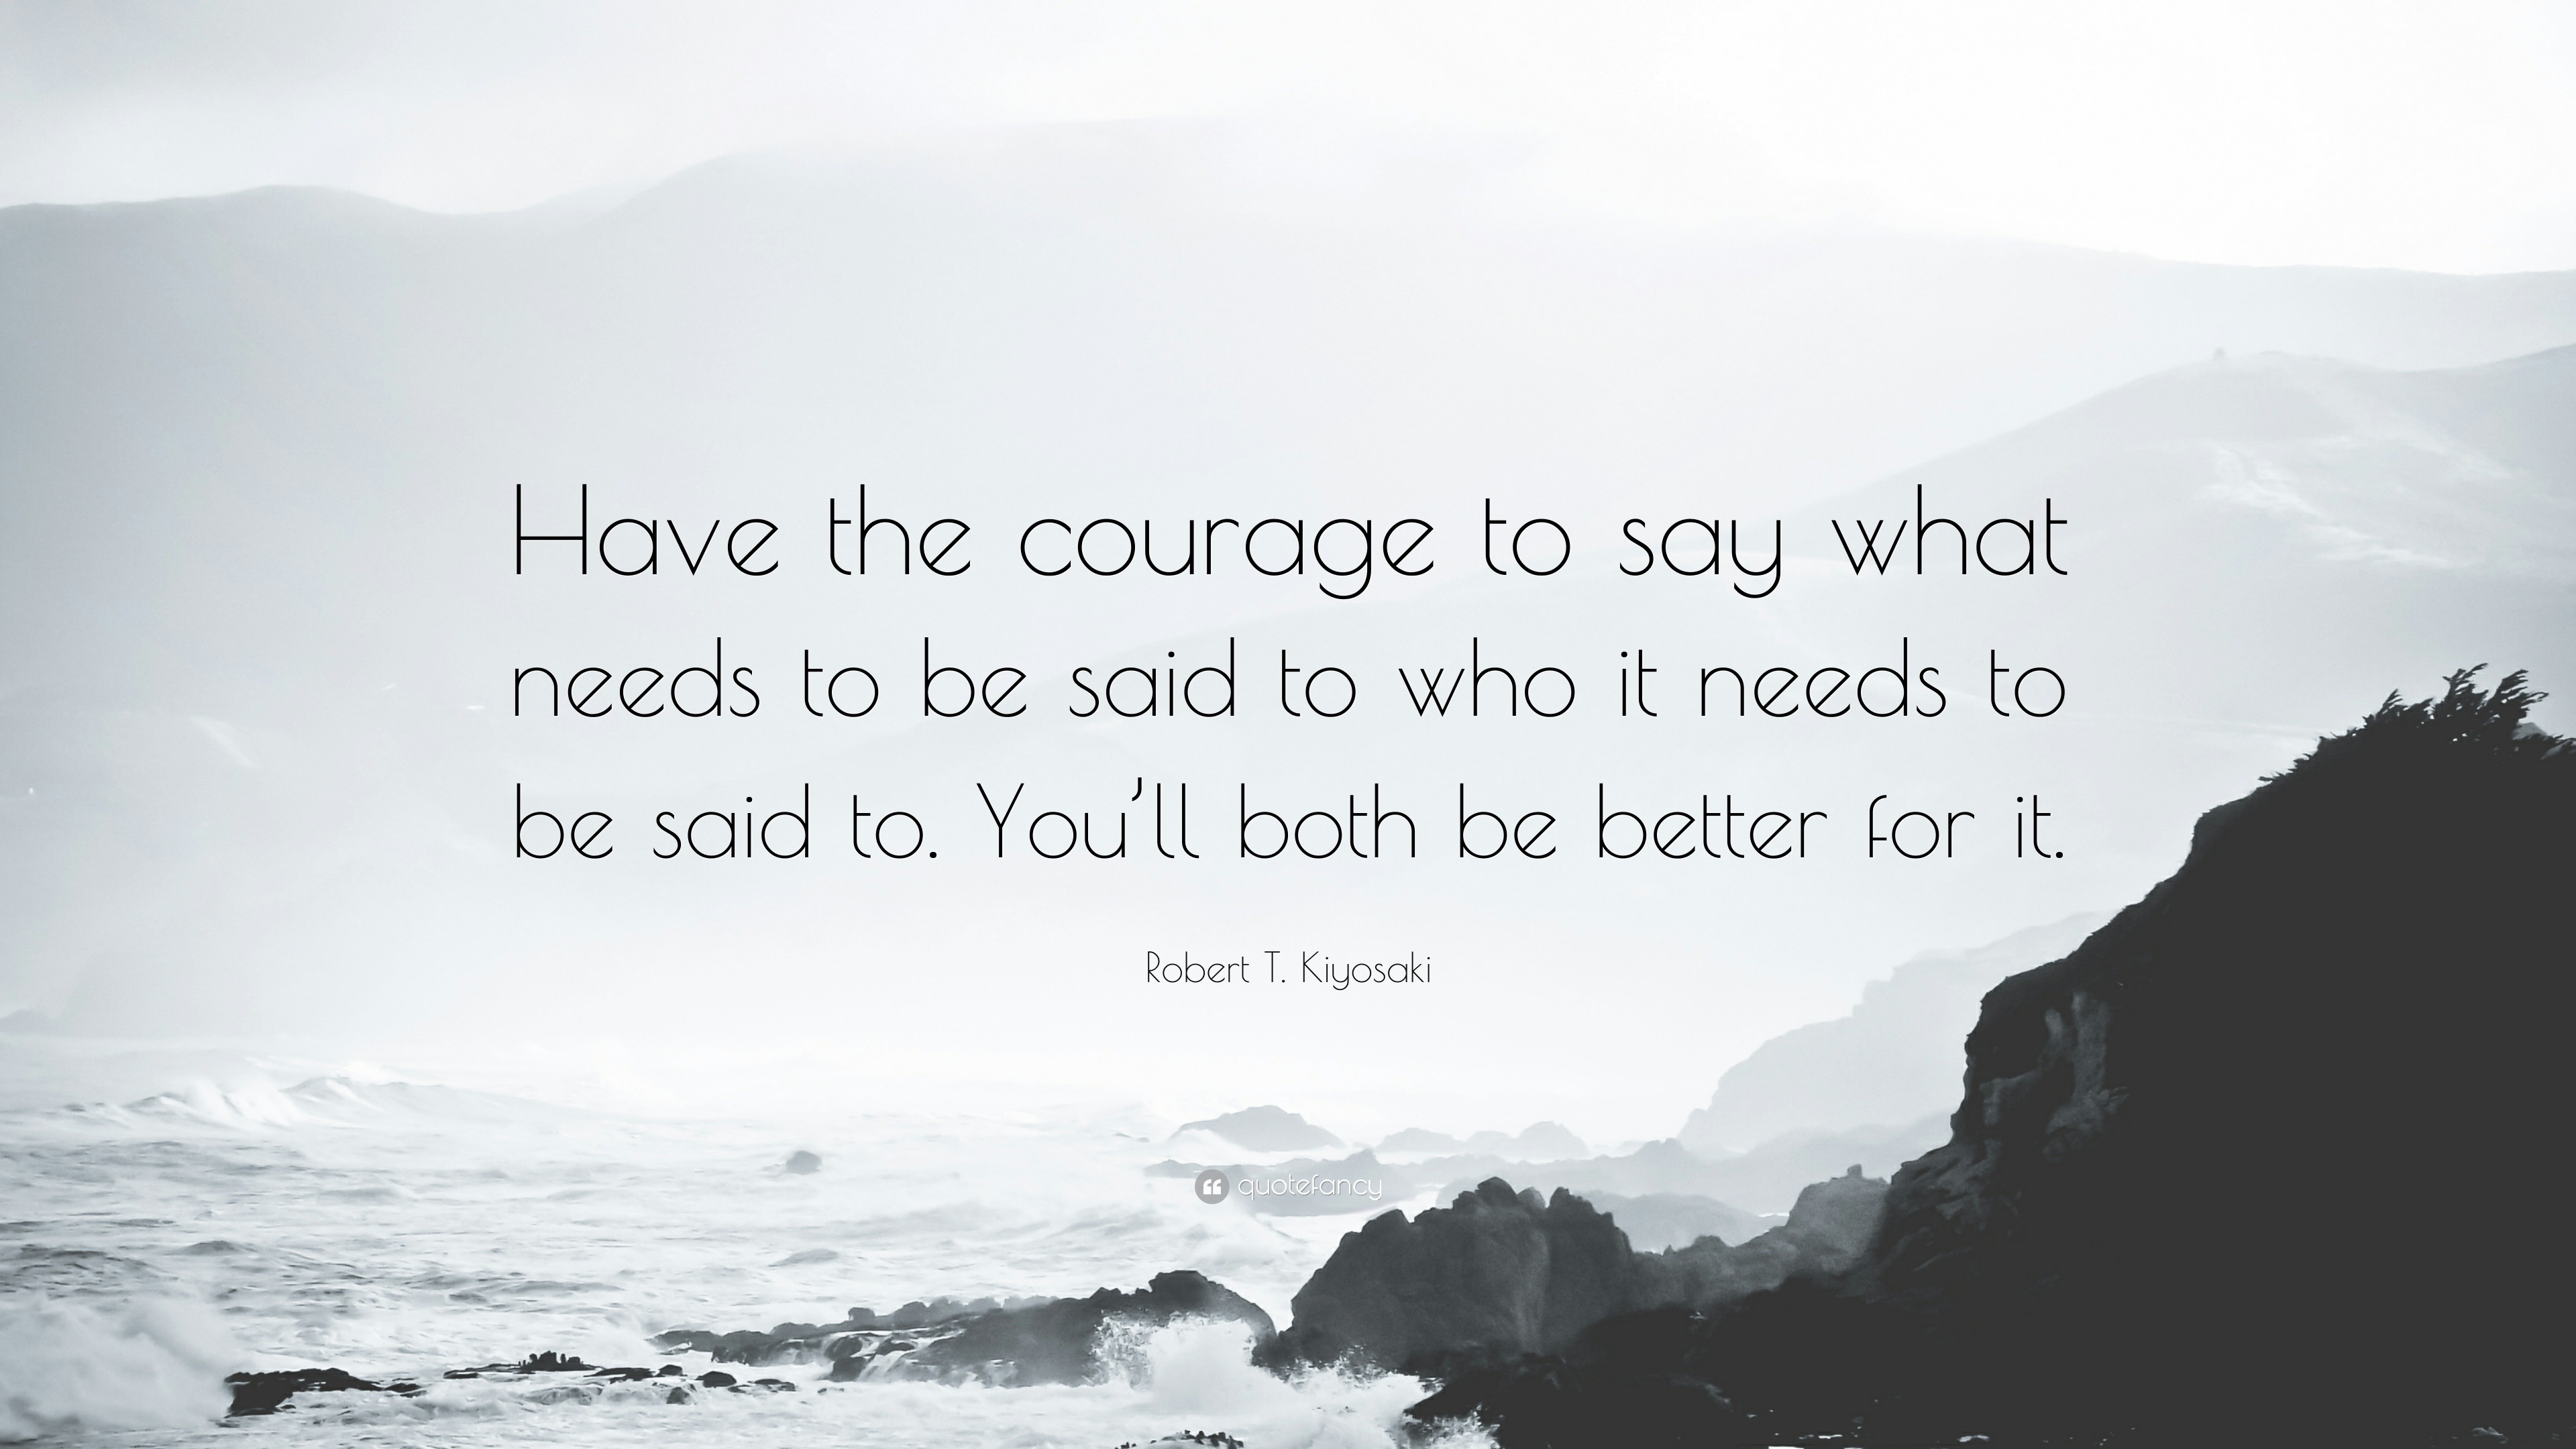 Robert T. Kiyosaki Quote: “Have the courage to say what needs to be ...